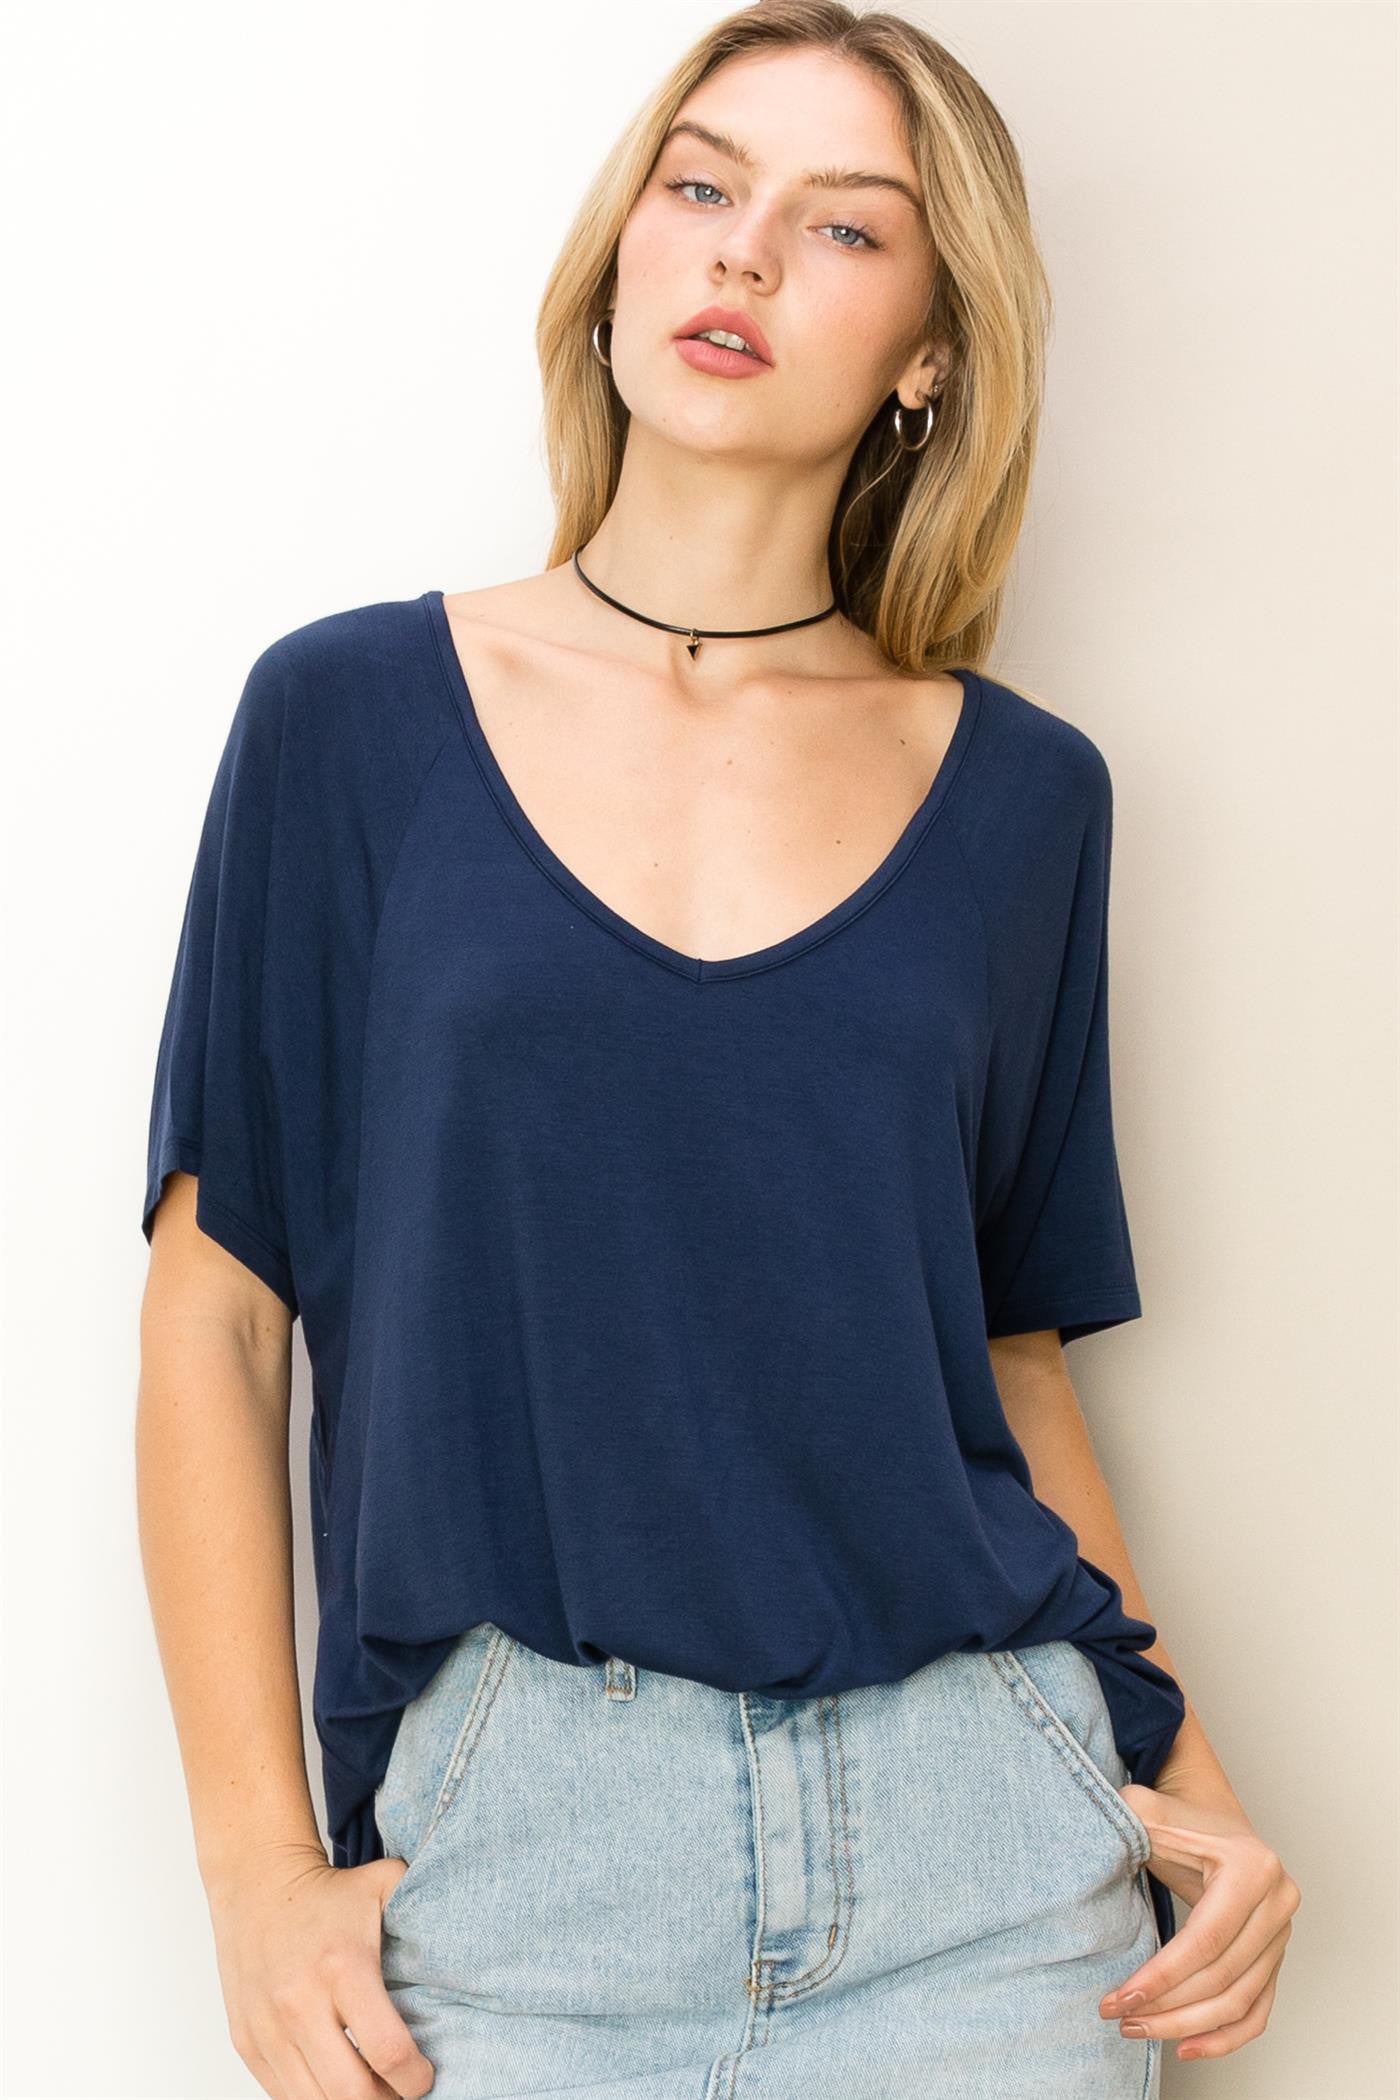 At Rest Oversized Short Sleeve Top - 5 Colors